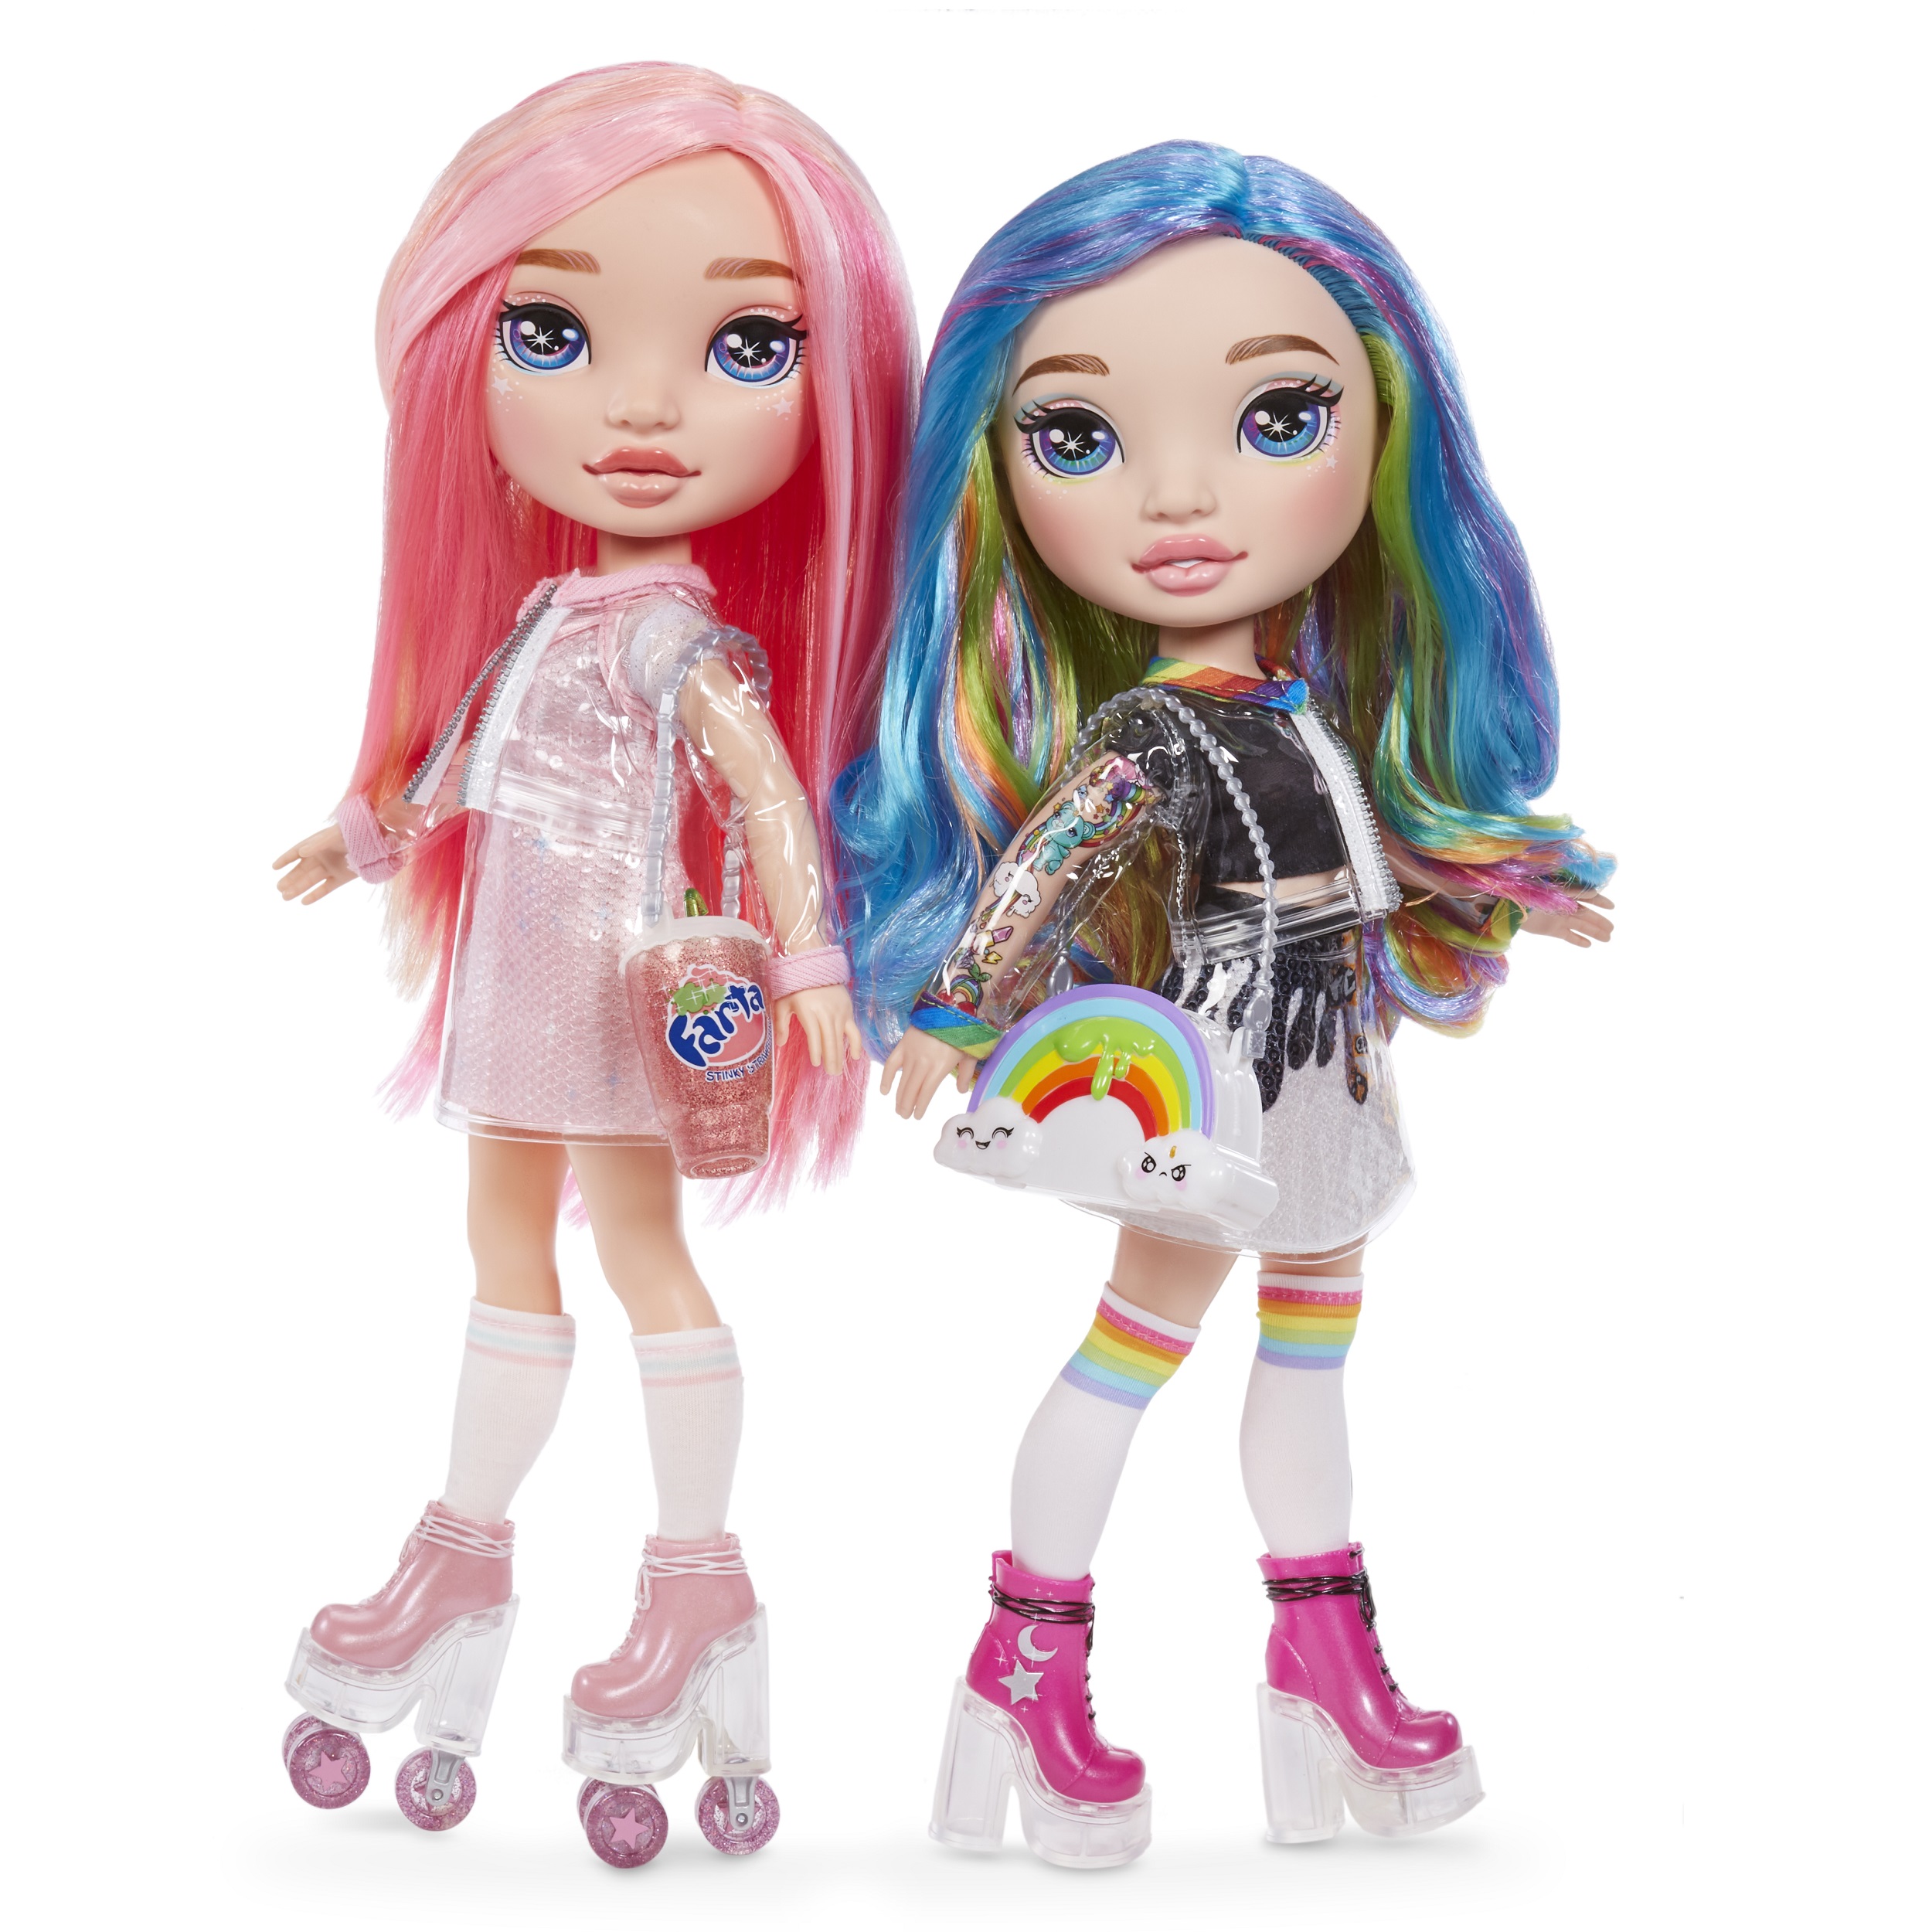 Rainbow Surprise by Poopsie: 14" Doll with 20+ Slime & Fashion Surprises, Rainbow Dream or Pixie Rose - image 8 of 8